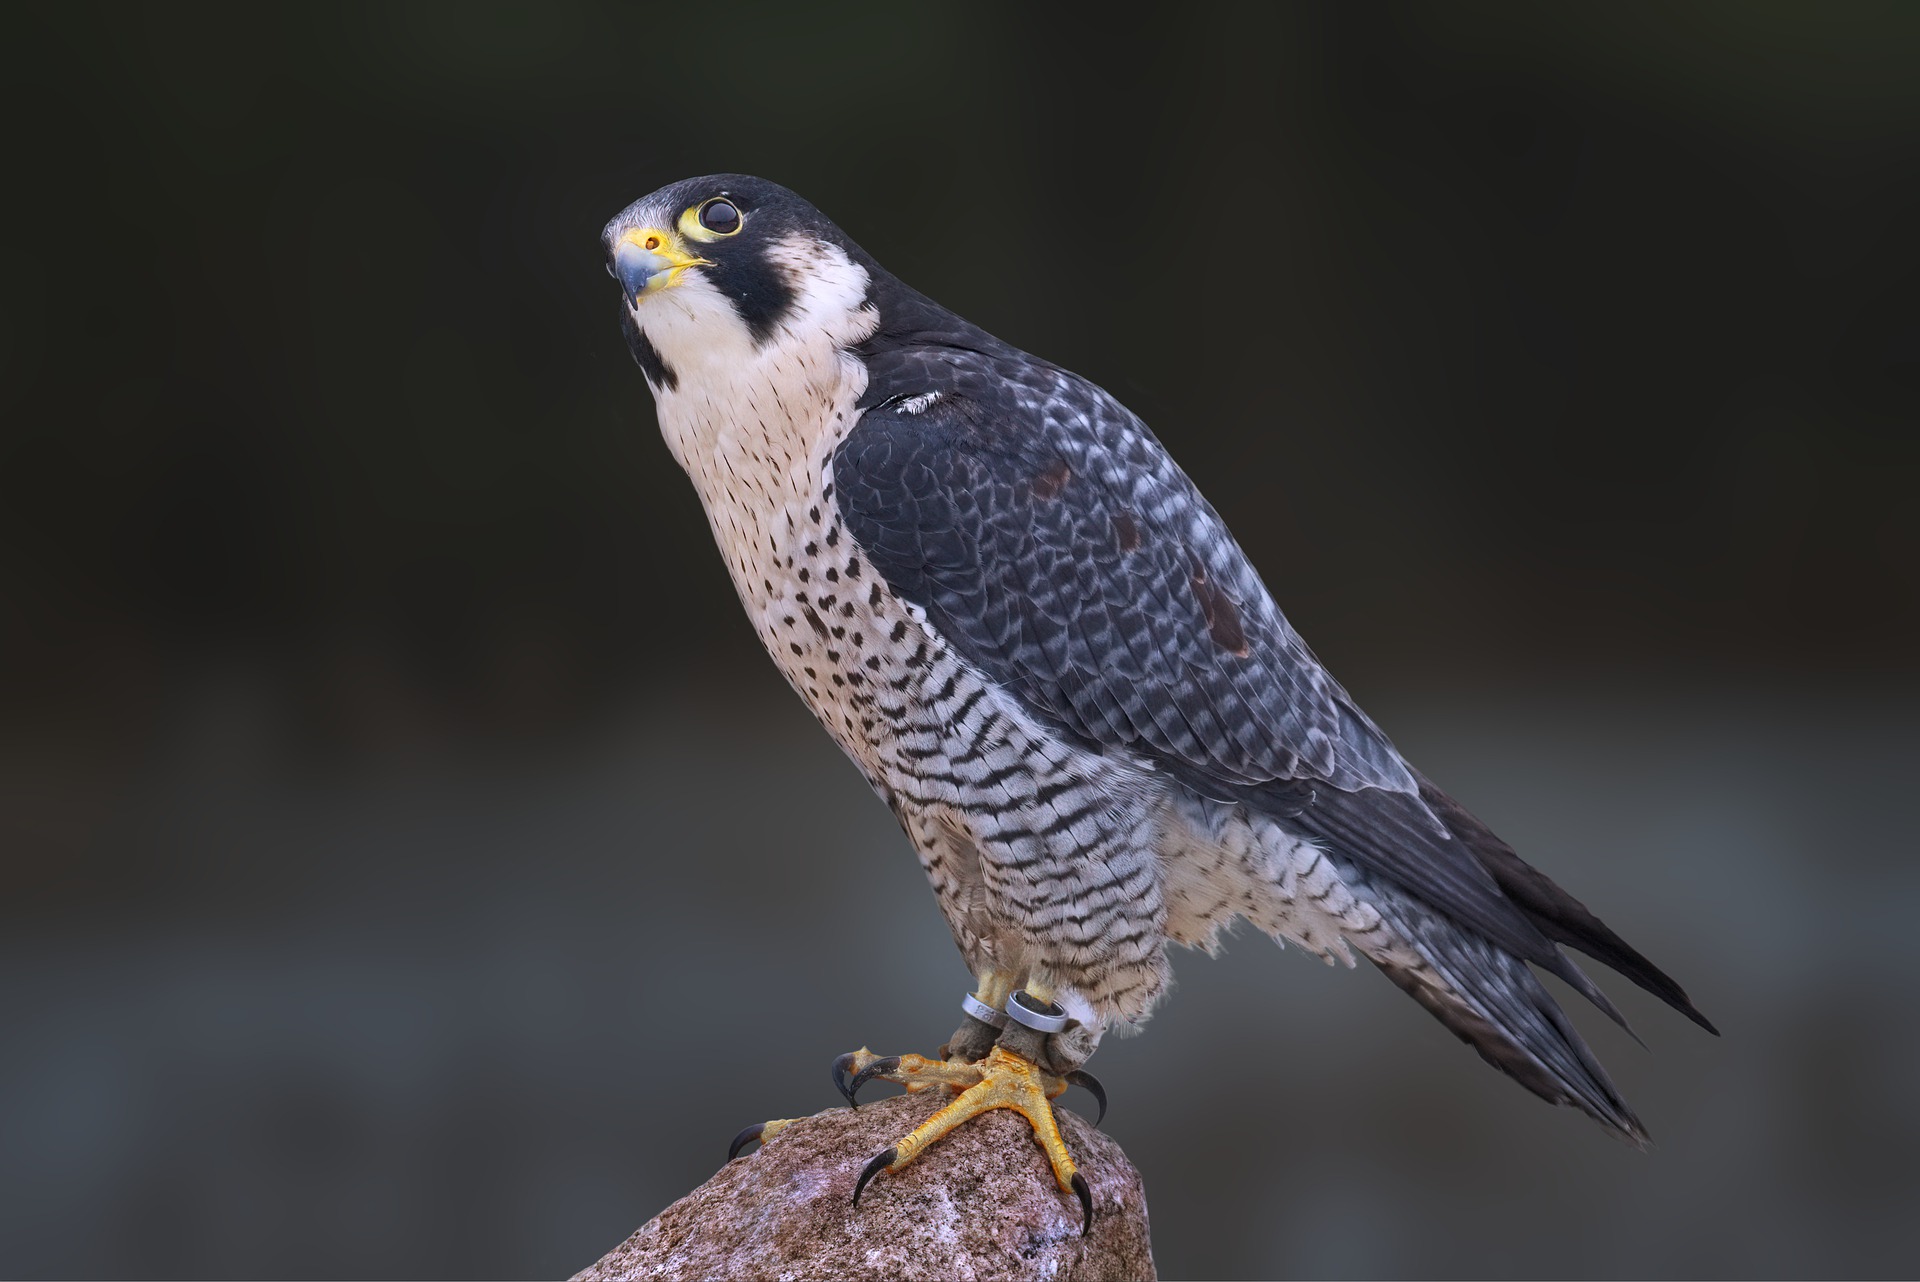 This photo is a close-up shot of a Peregrine Falcon. It has a white neck and breast, with black spots throughout its body. The feathers on its black are grey, blue and white. It has beady black eyes and a yellow beak. Its large yellow feet and black claws are resting on a brown rock.